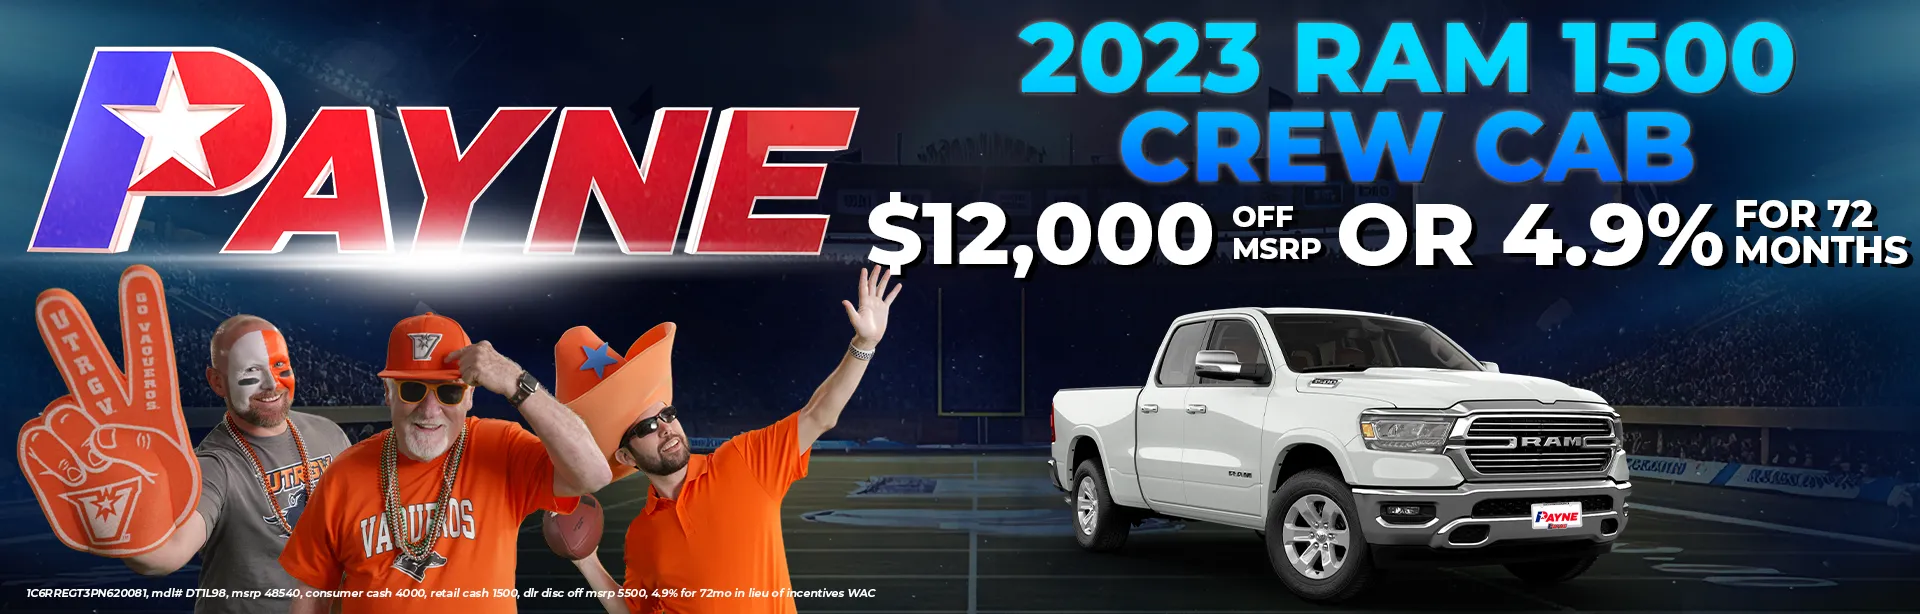 $12,000 off MSRP or 4.9% for 72 months on 2023 RAM 1500 Crew Cab